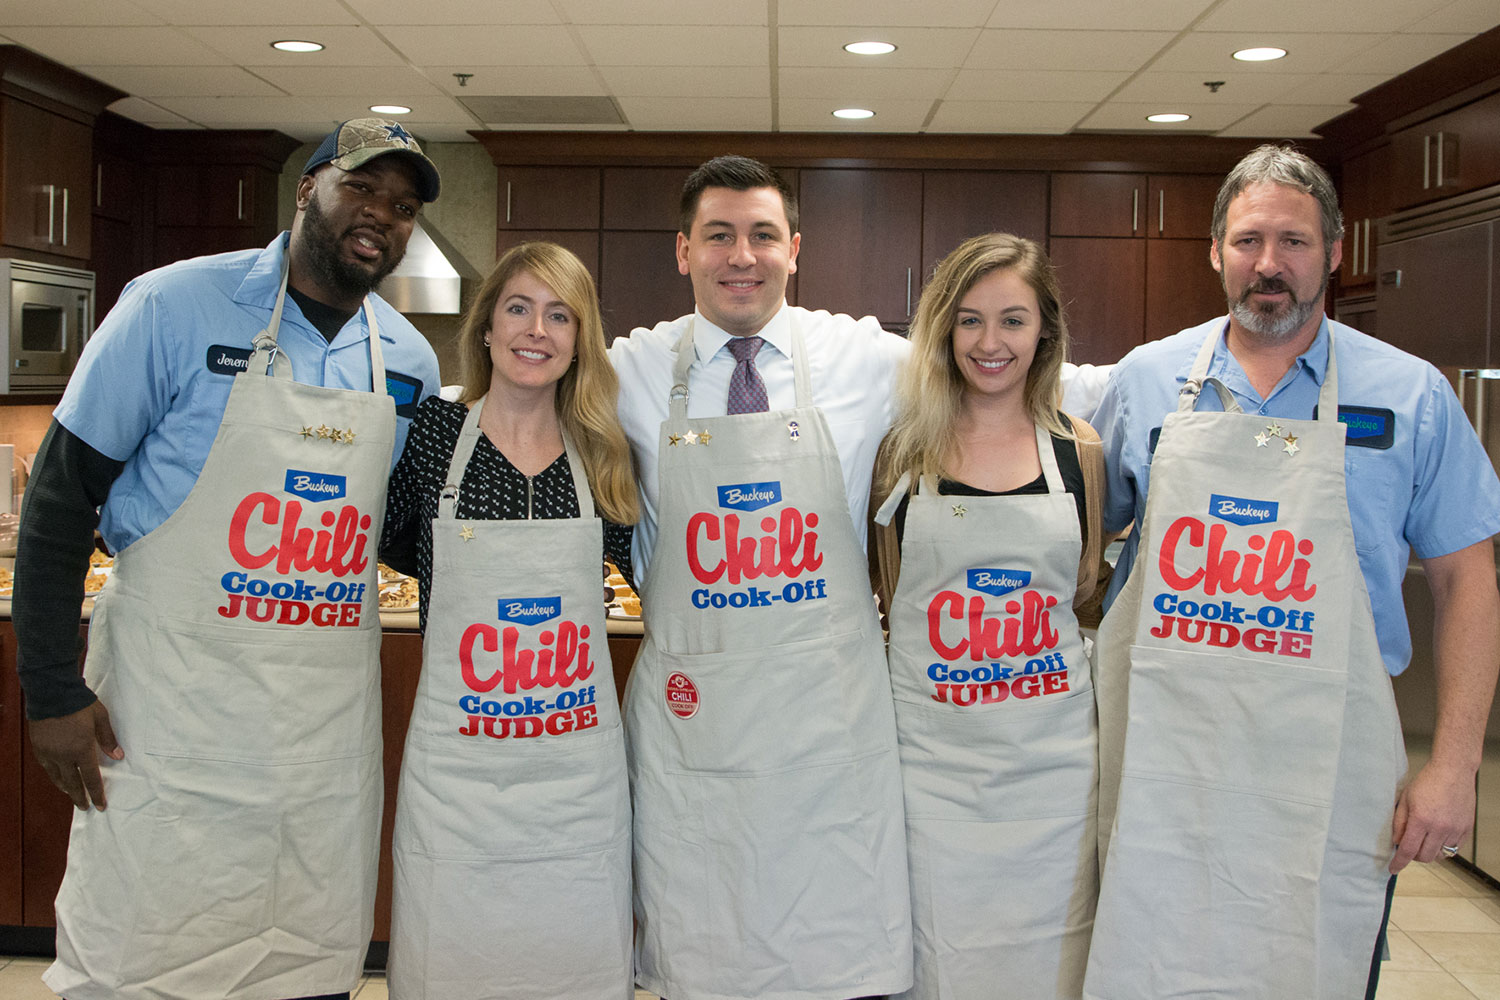 Buckeye employees in the kitchen wearing aprons that say Buckeye Chili Cook-Off Judge